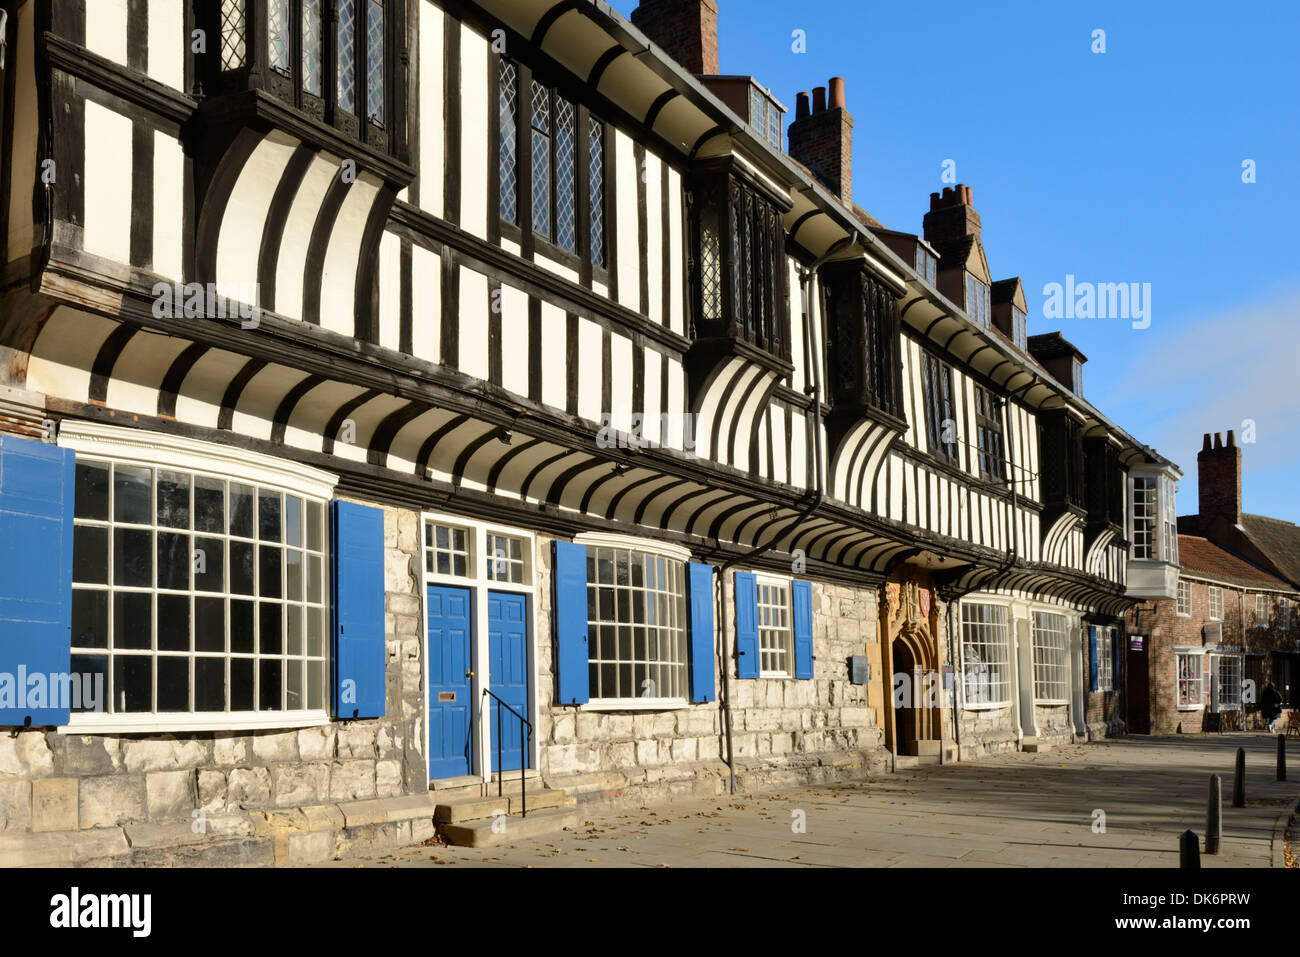 Medieval half-timbered buildings of St William's College, College Street, York, Yorkshire, England, United Kingdom, Europe Stock Photo